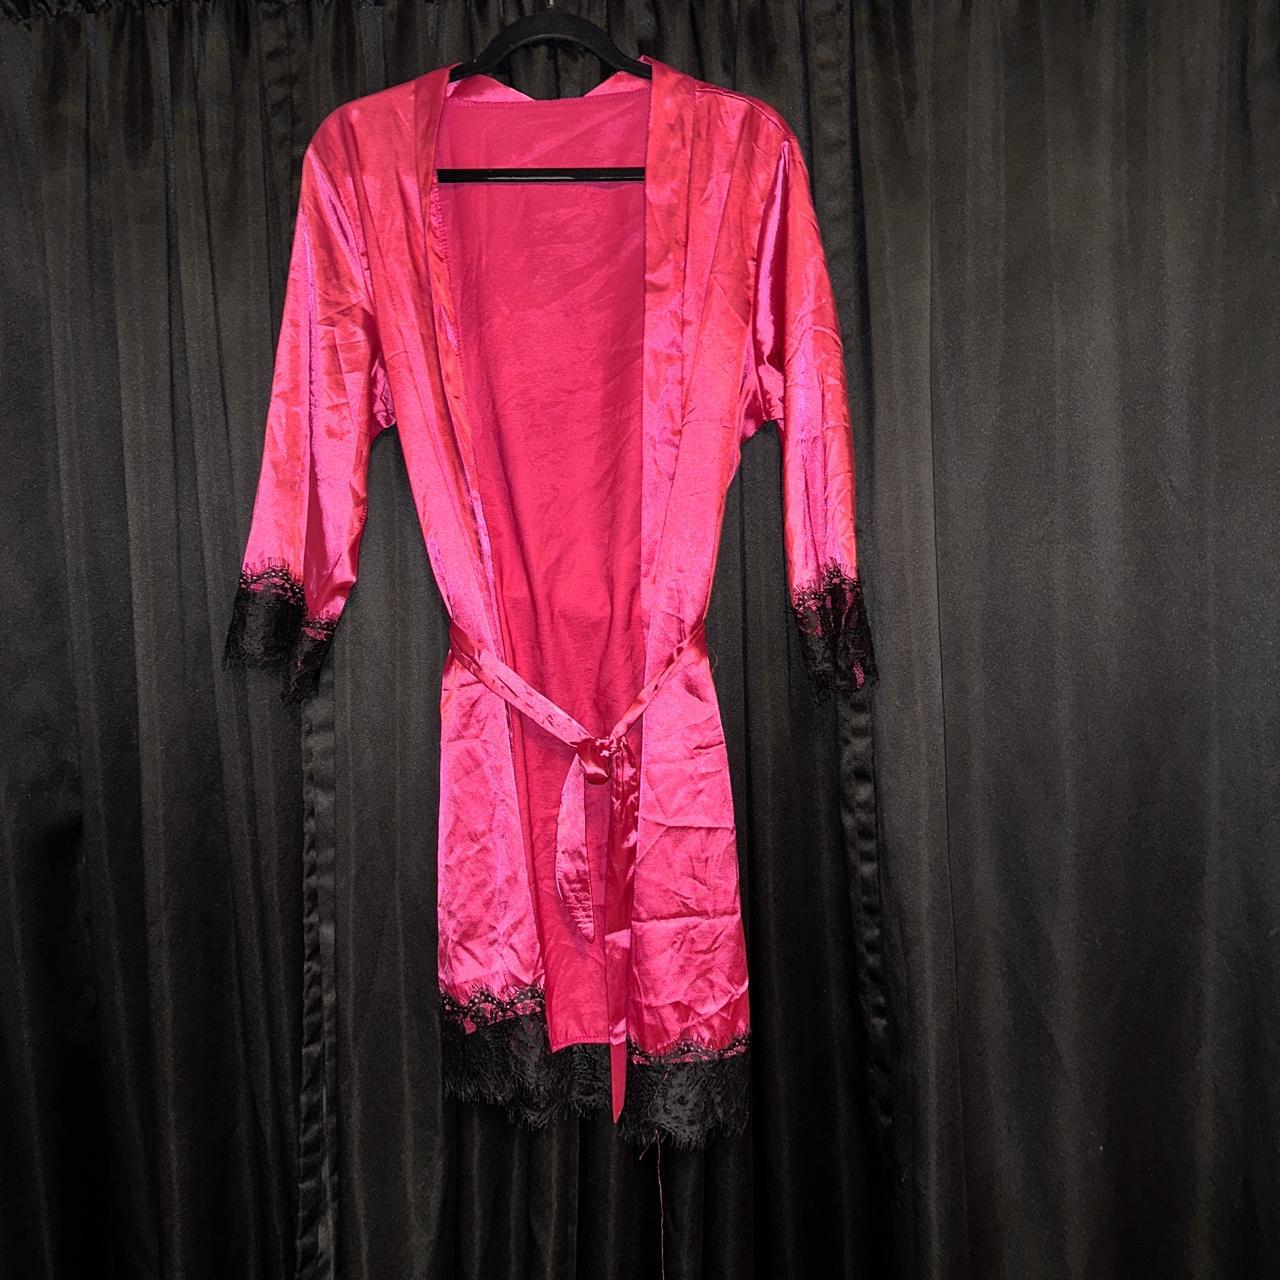 Women's Black and Pink Robe (4)